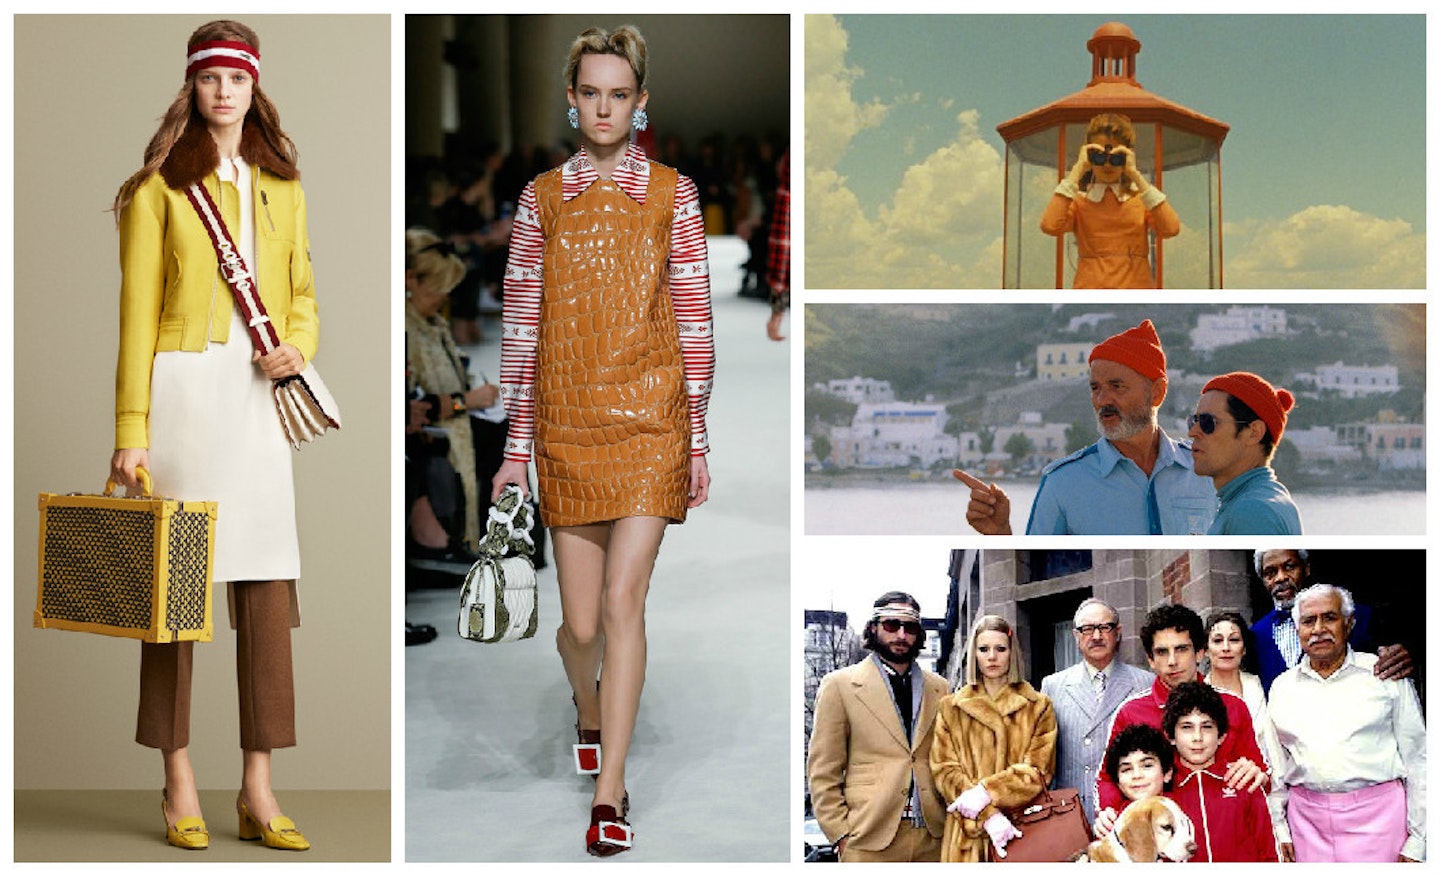 This New Fashion Line Makes You Feel Like You're in a Wes Anderson